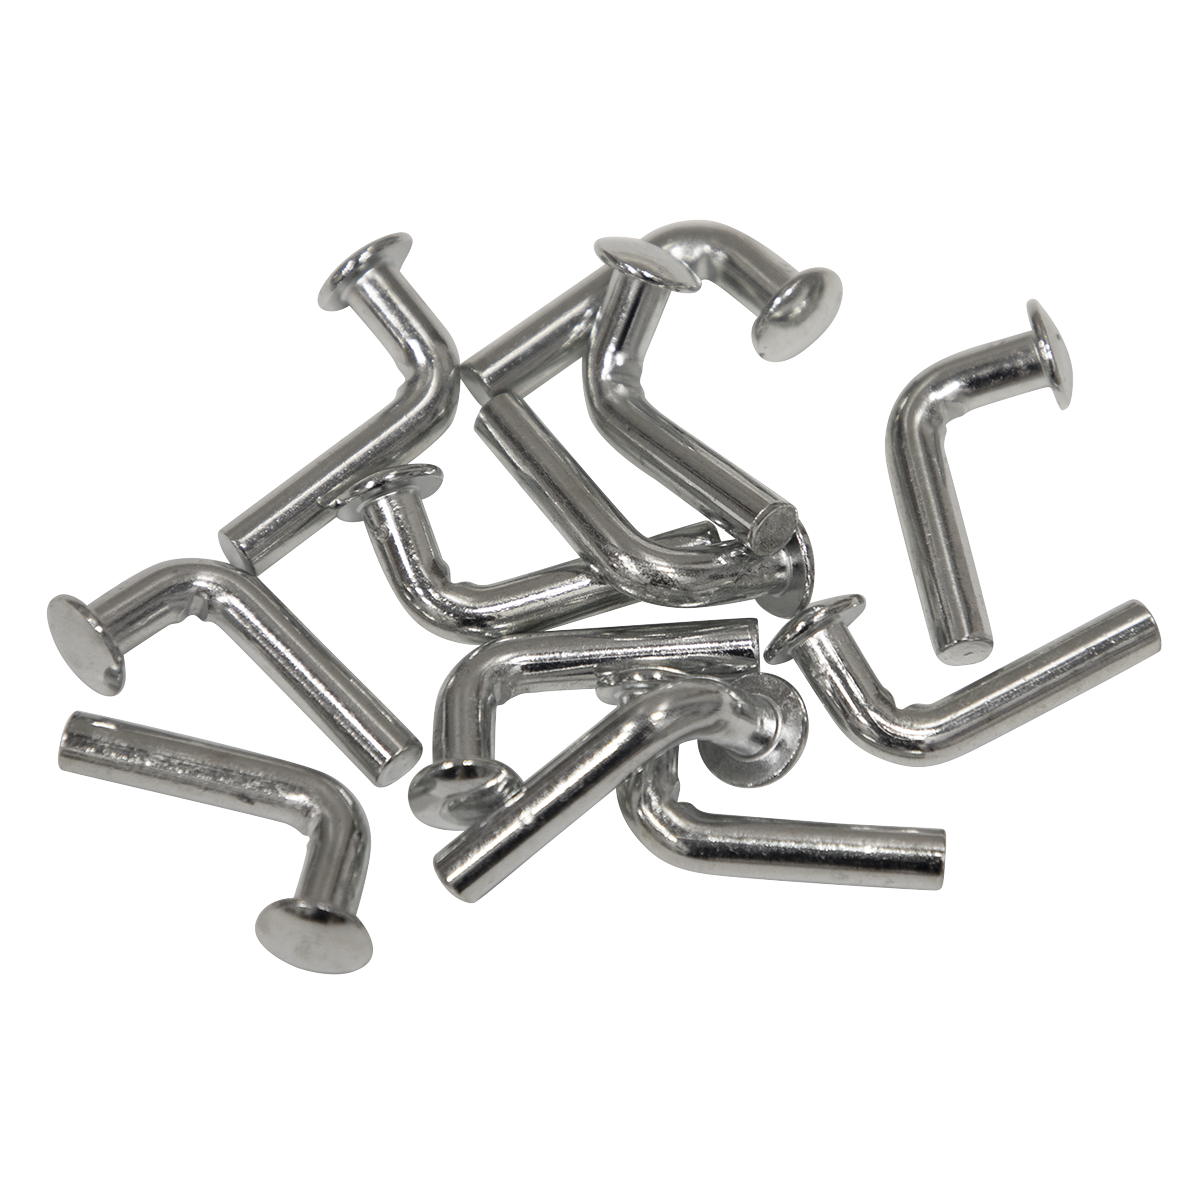 Sealey Safety Locking Pin Pack of 12